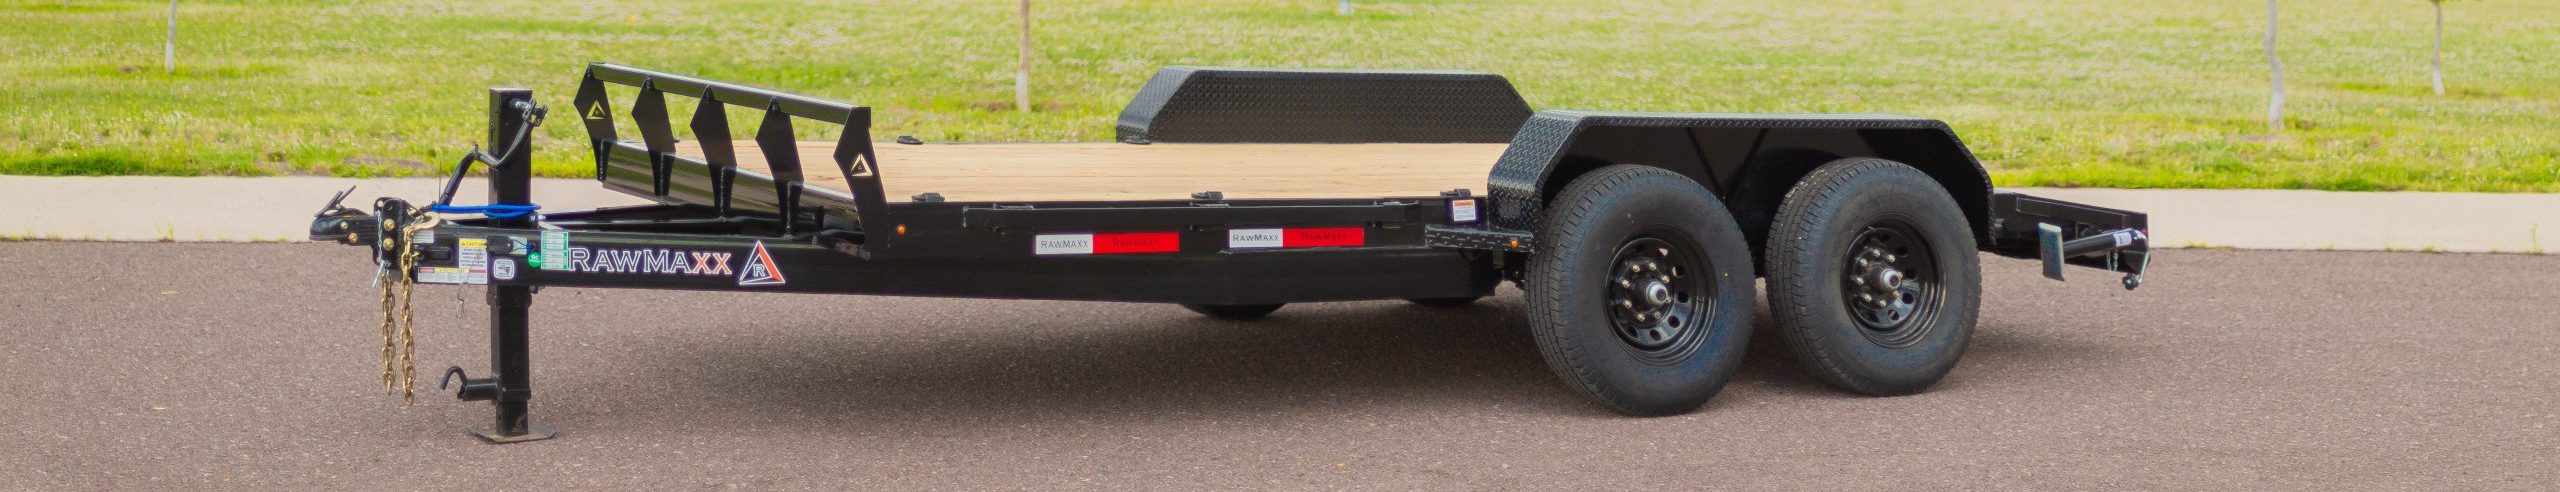 Best Equipment Hauling Trailers for Sale Near You in USA - RawMaxx